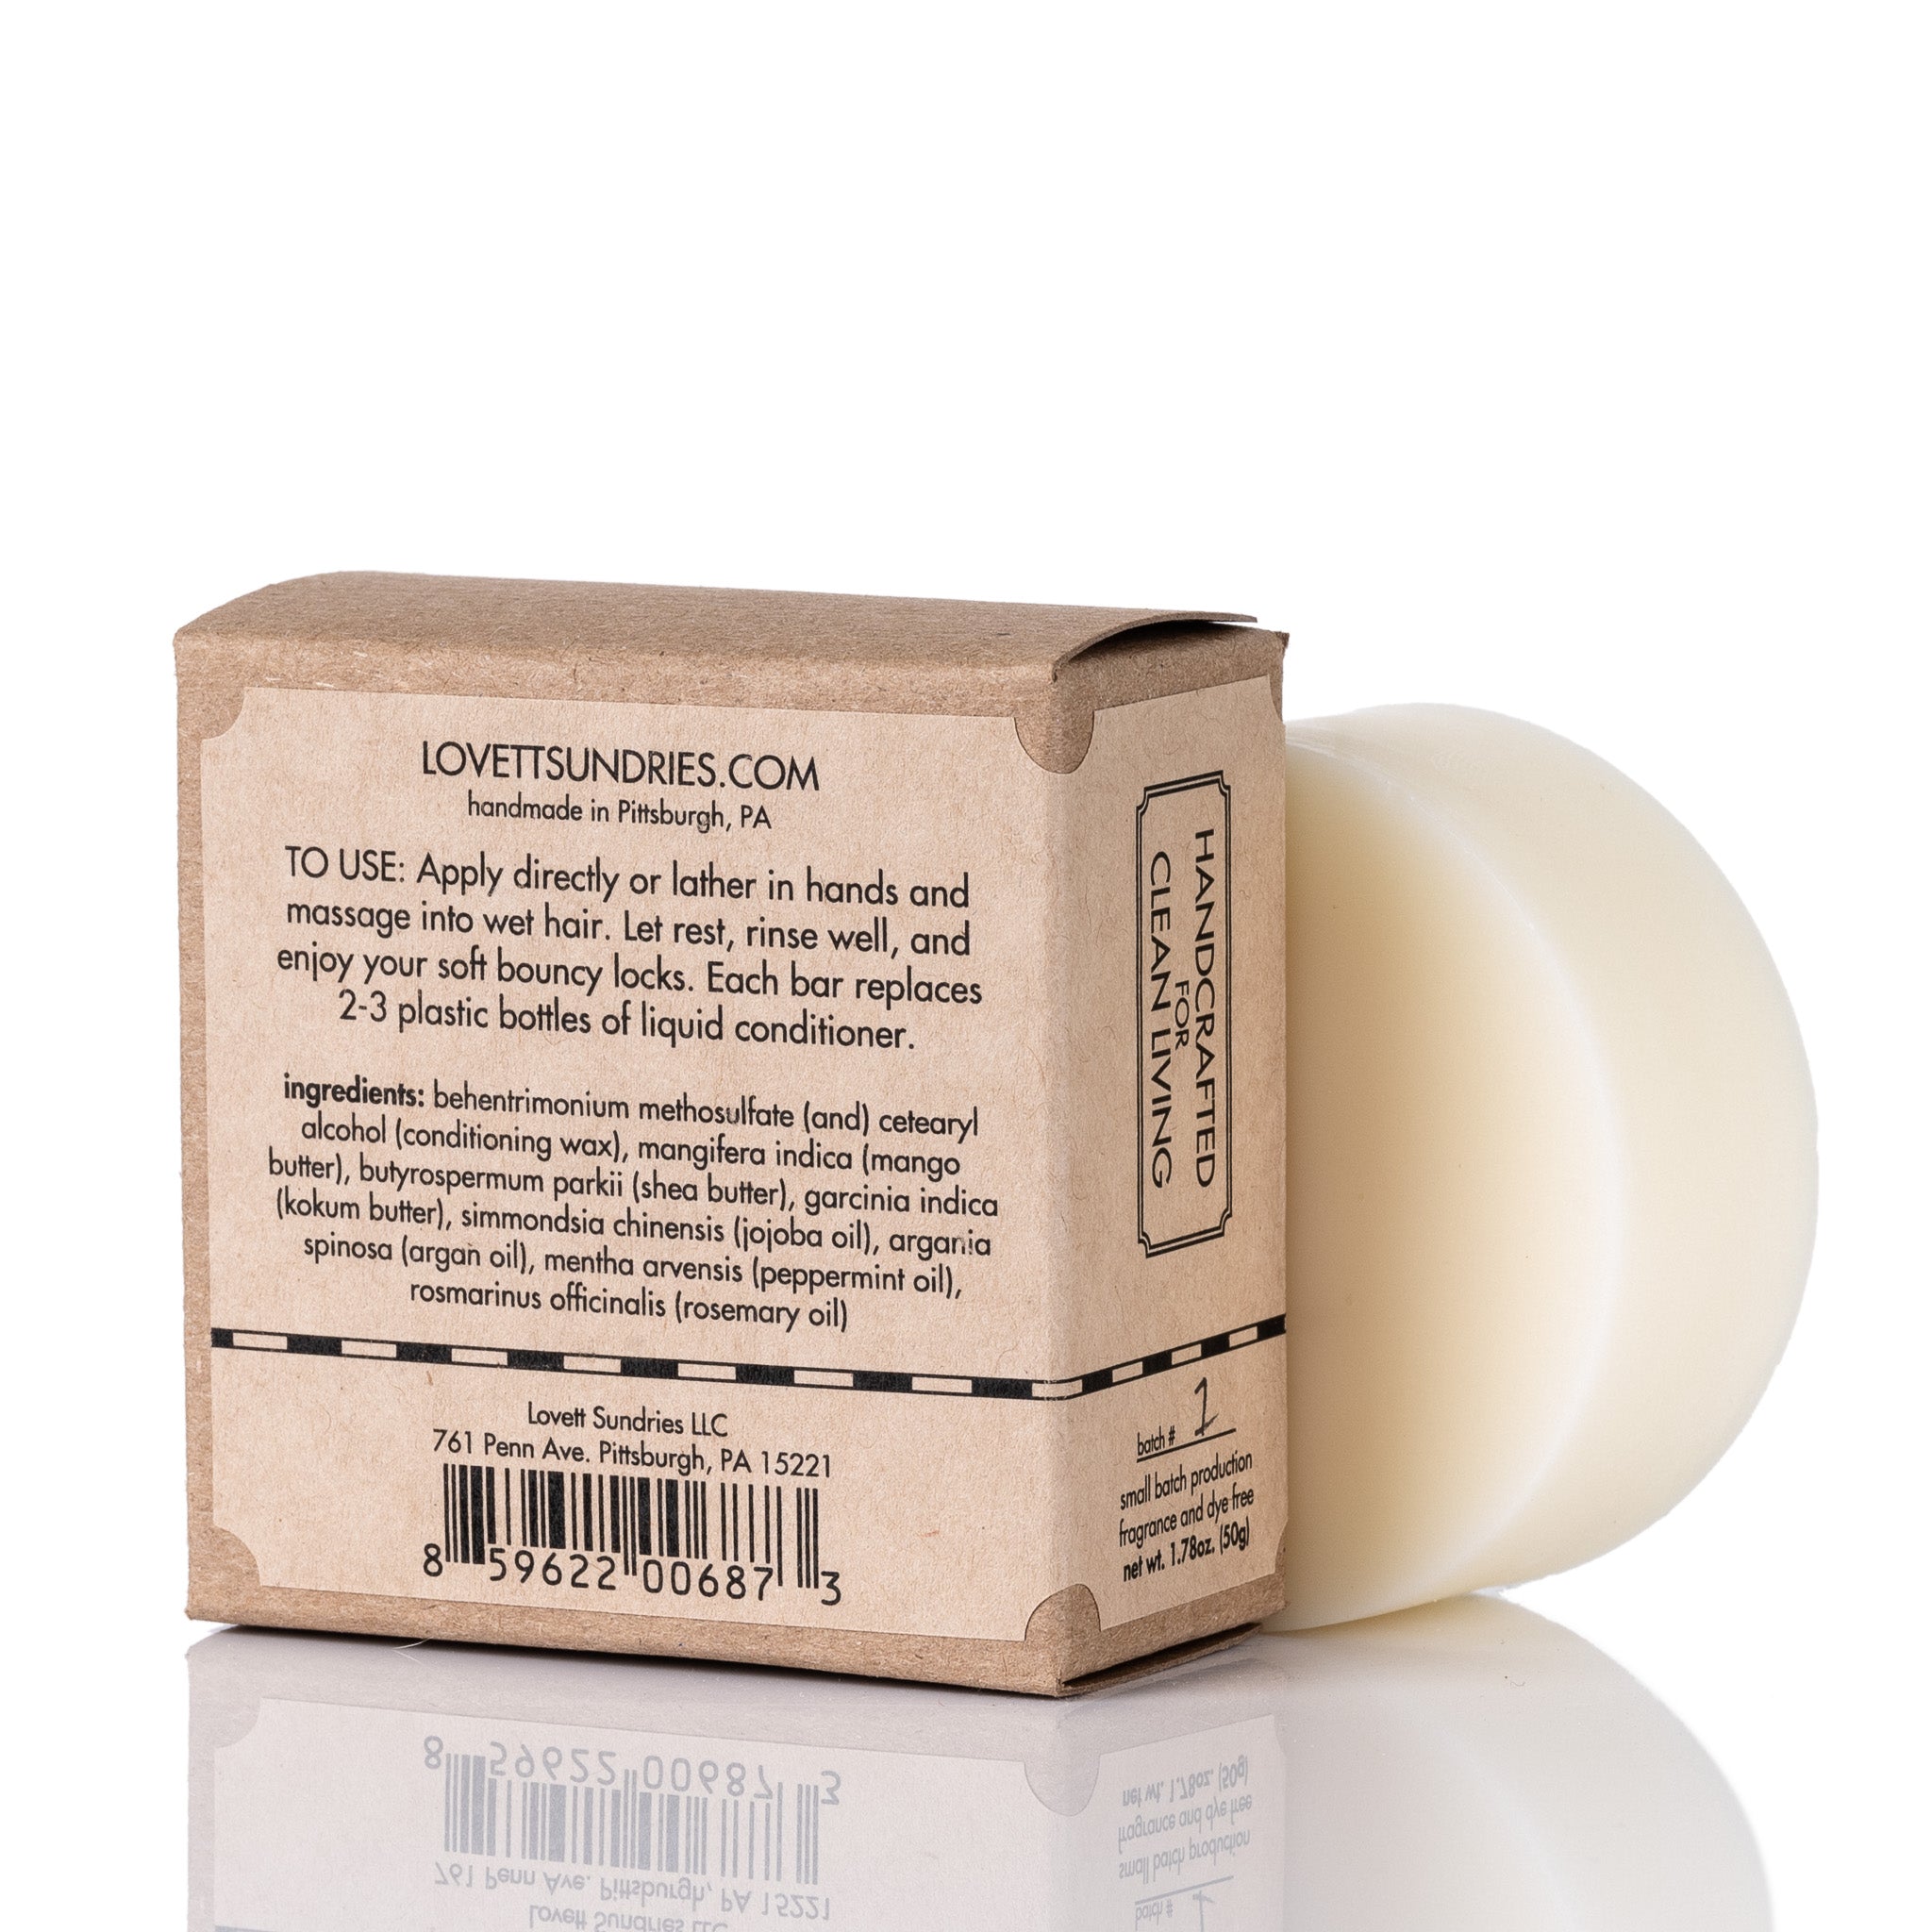 The ingredient list and instructions to use a conditioner bar.